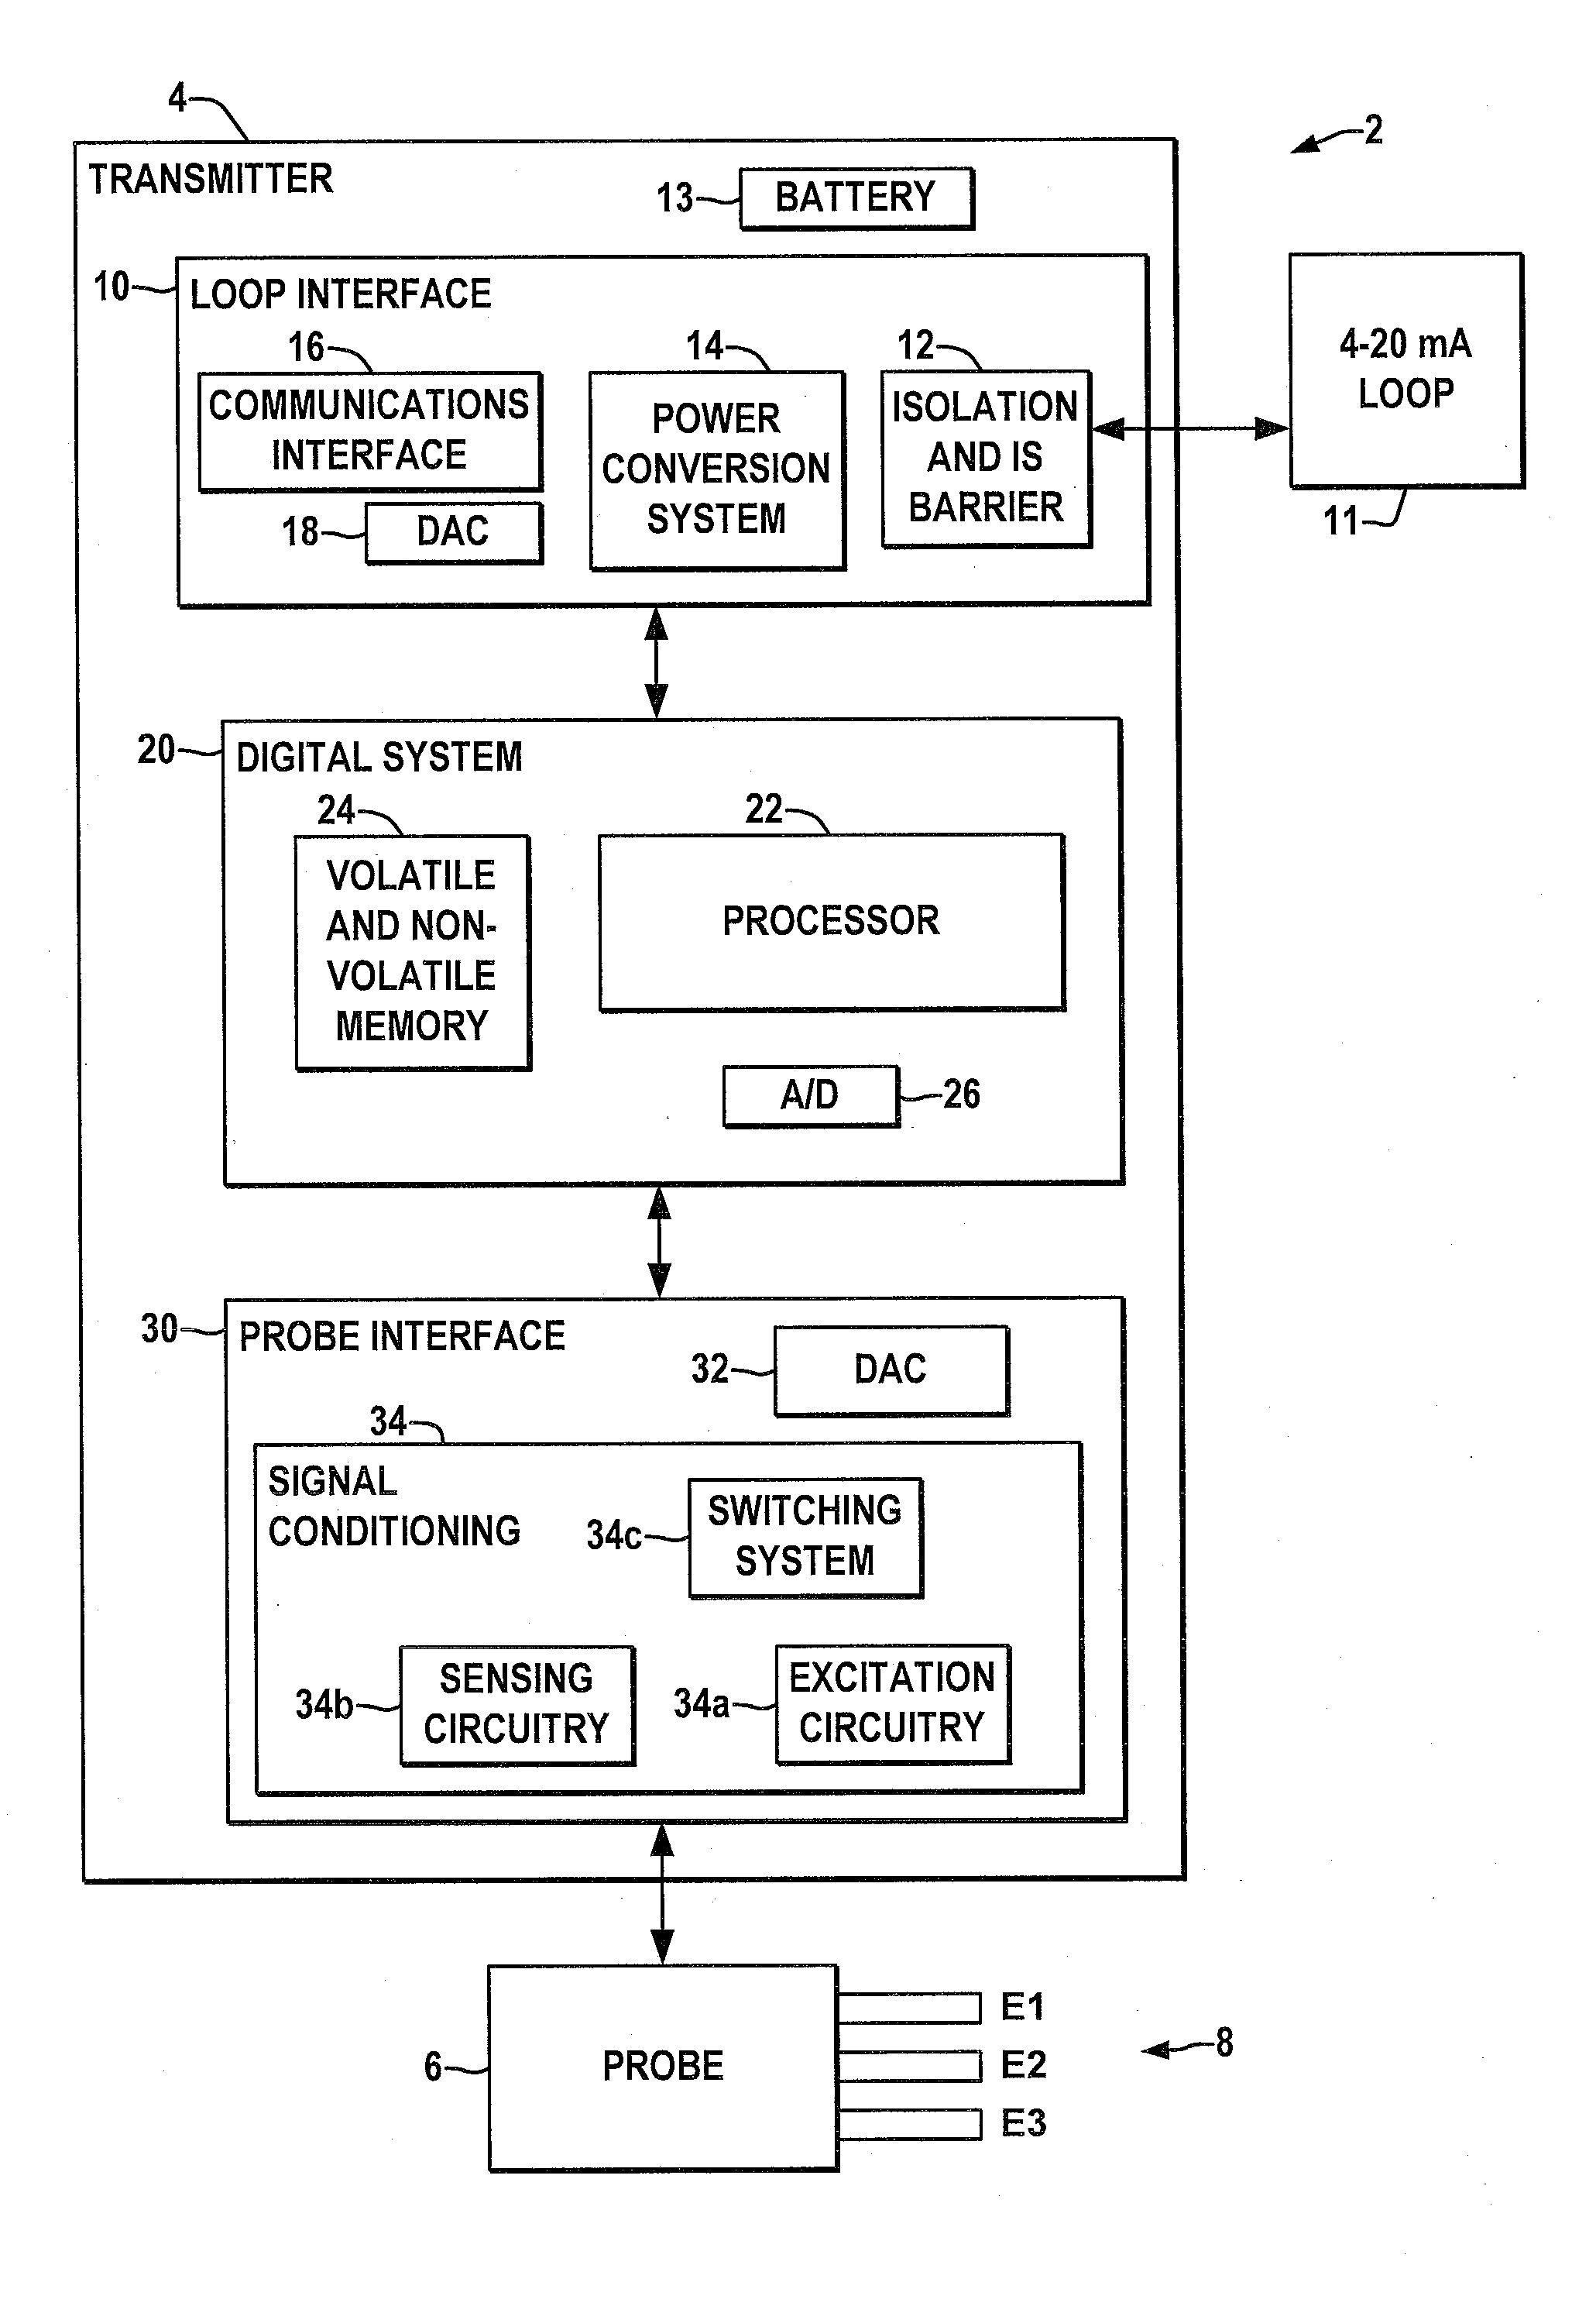 Intrinsically safe corrosion measurement and history logging field device